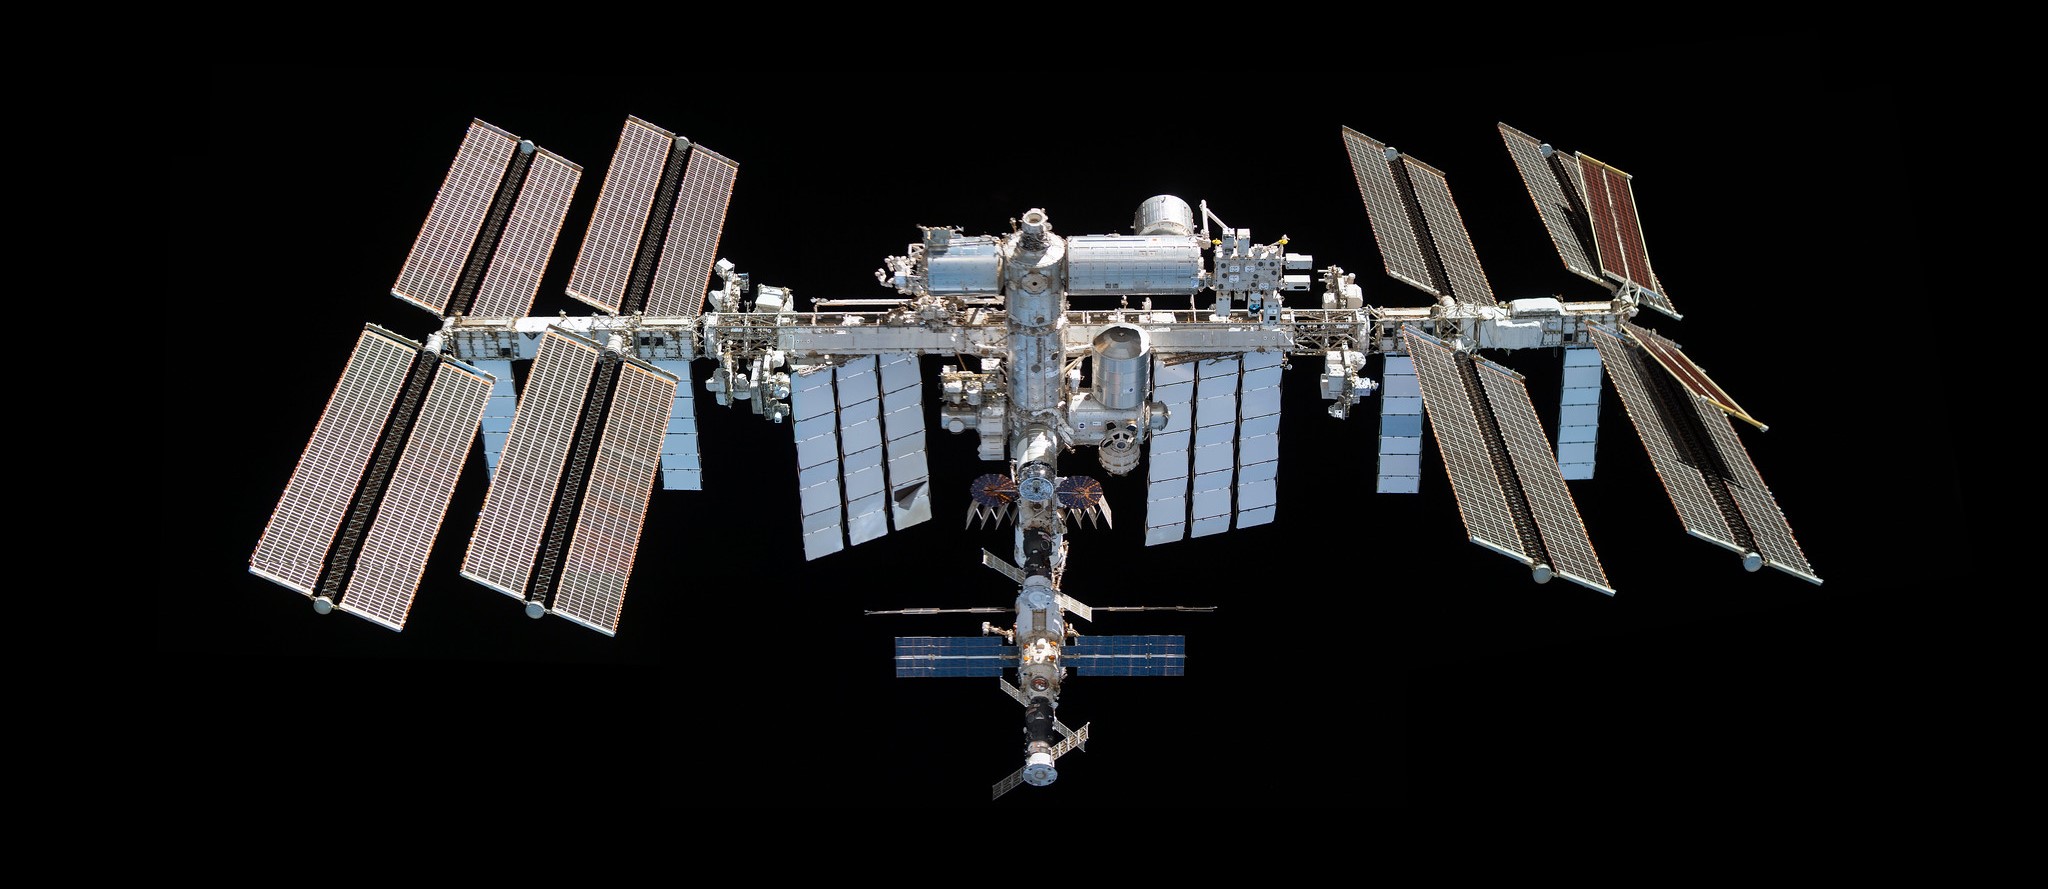 Russia Says They Plan to Leave International Space Station after 2024